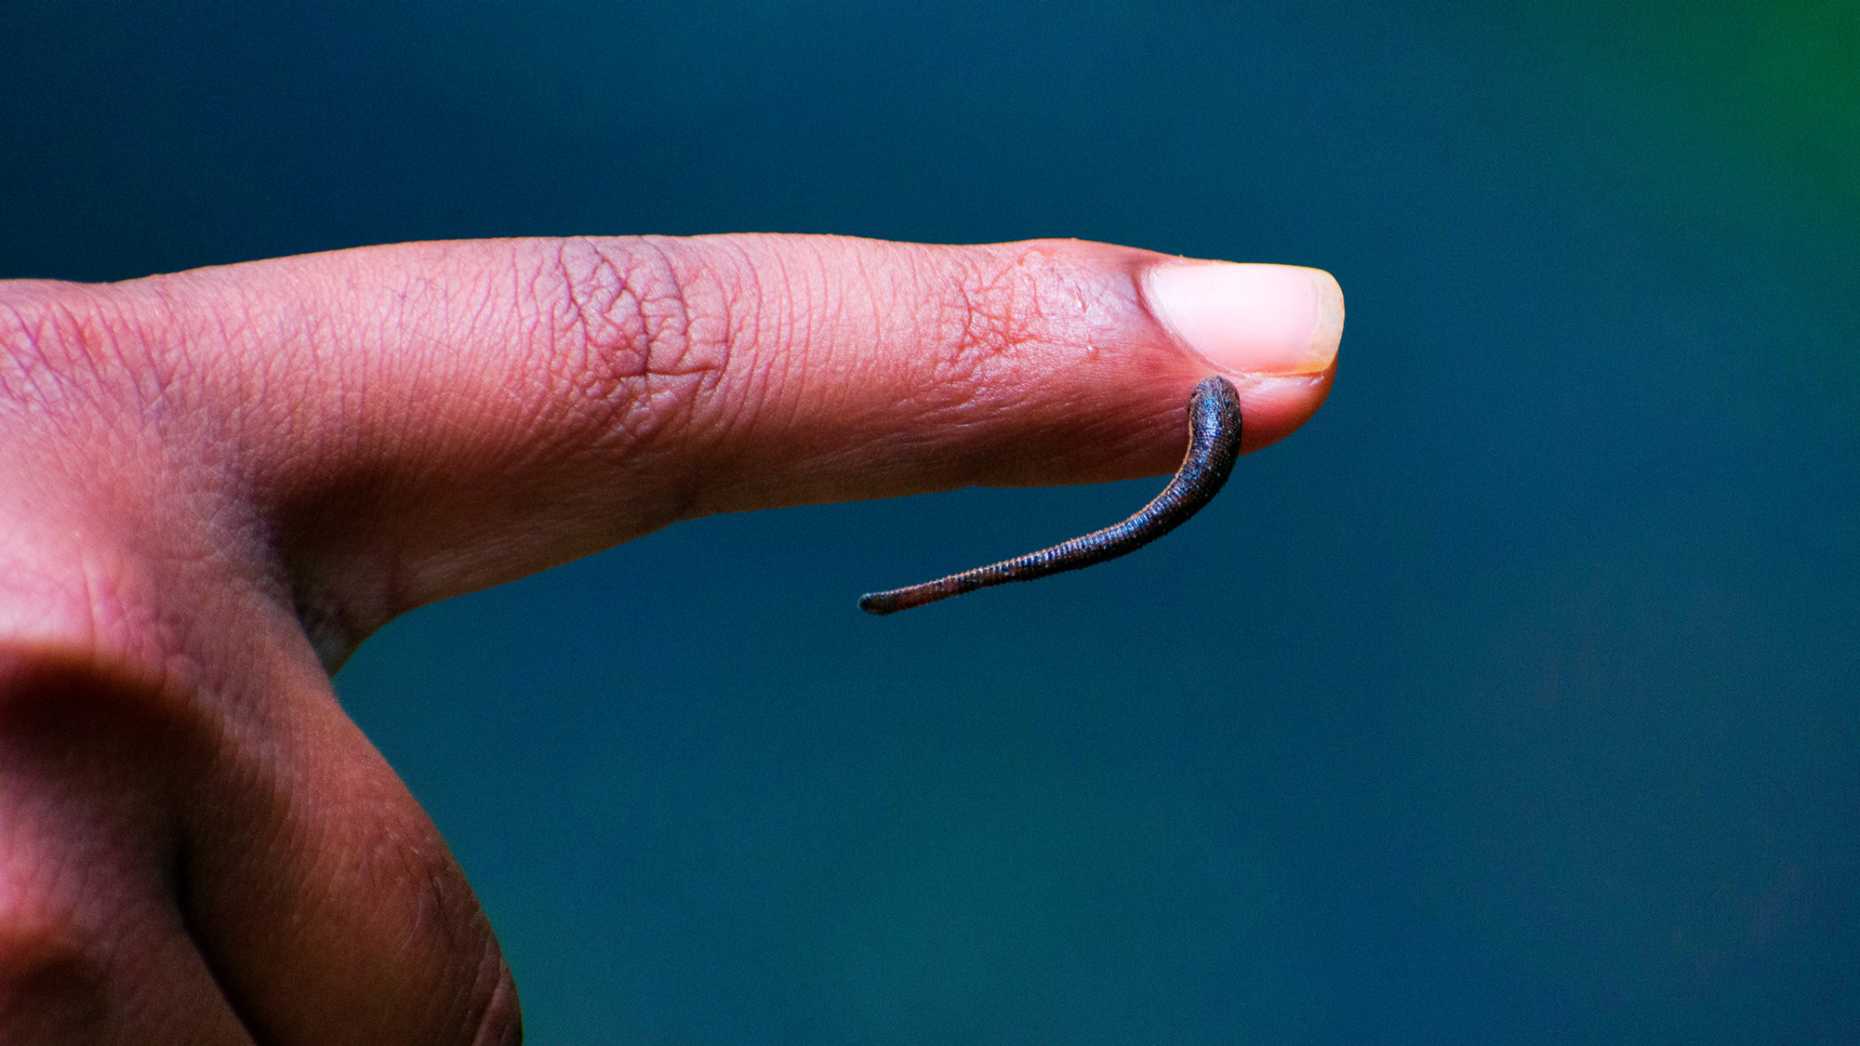 Finger with a leech hanging from it